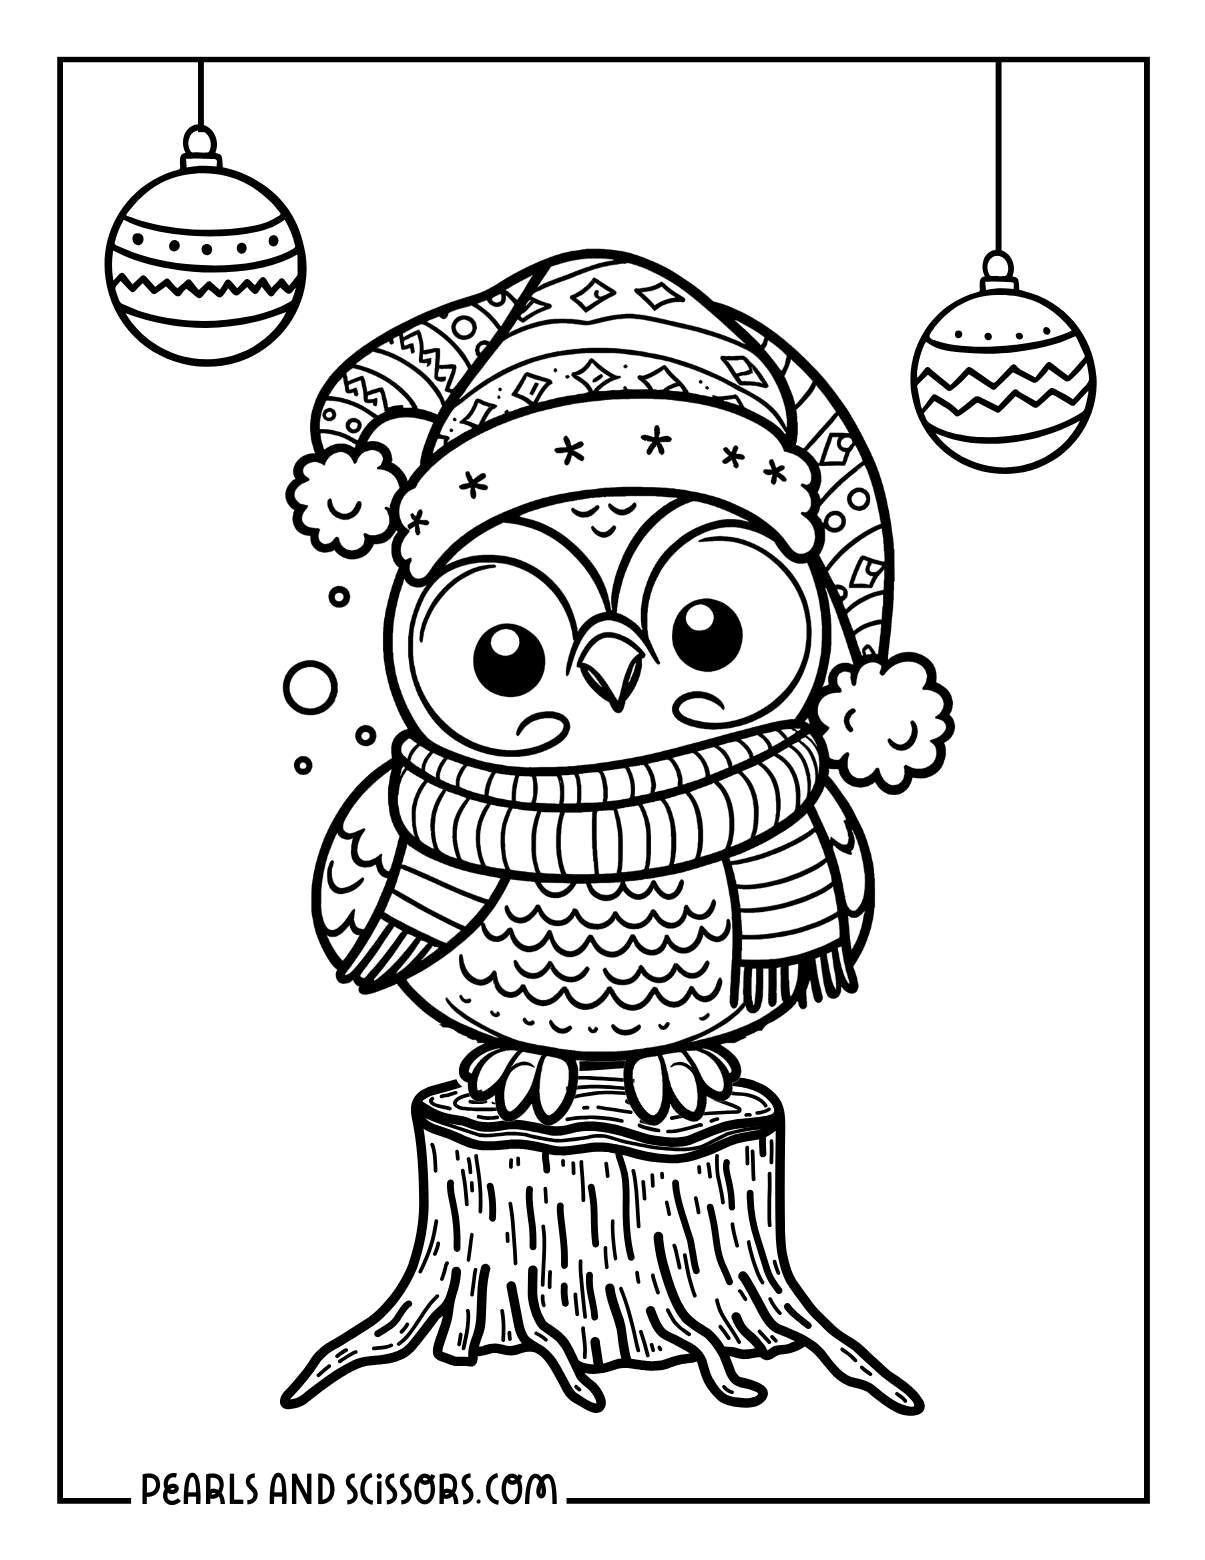 Festive owl wearing a santa hat, scarf while standing on a tree log and christmas ornaments to color.